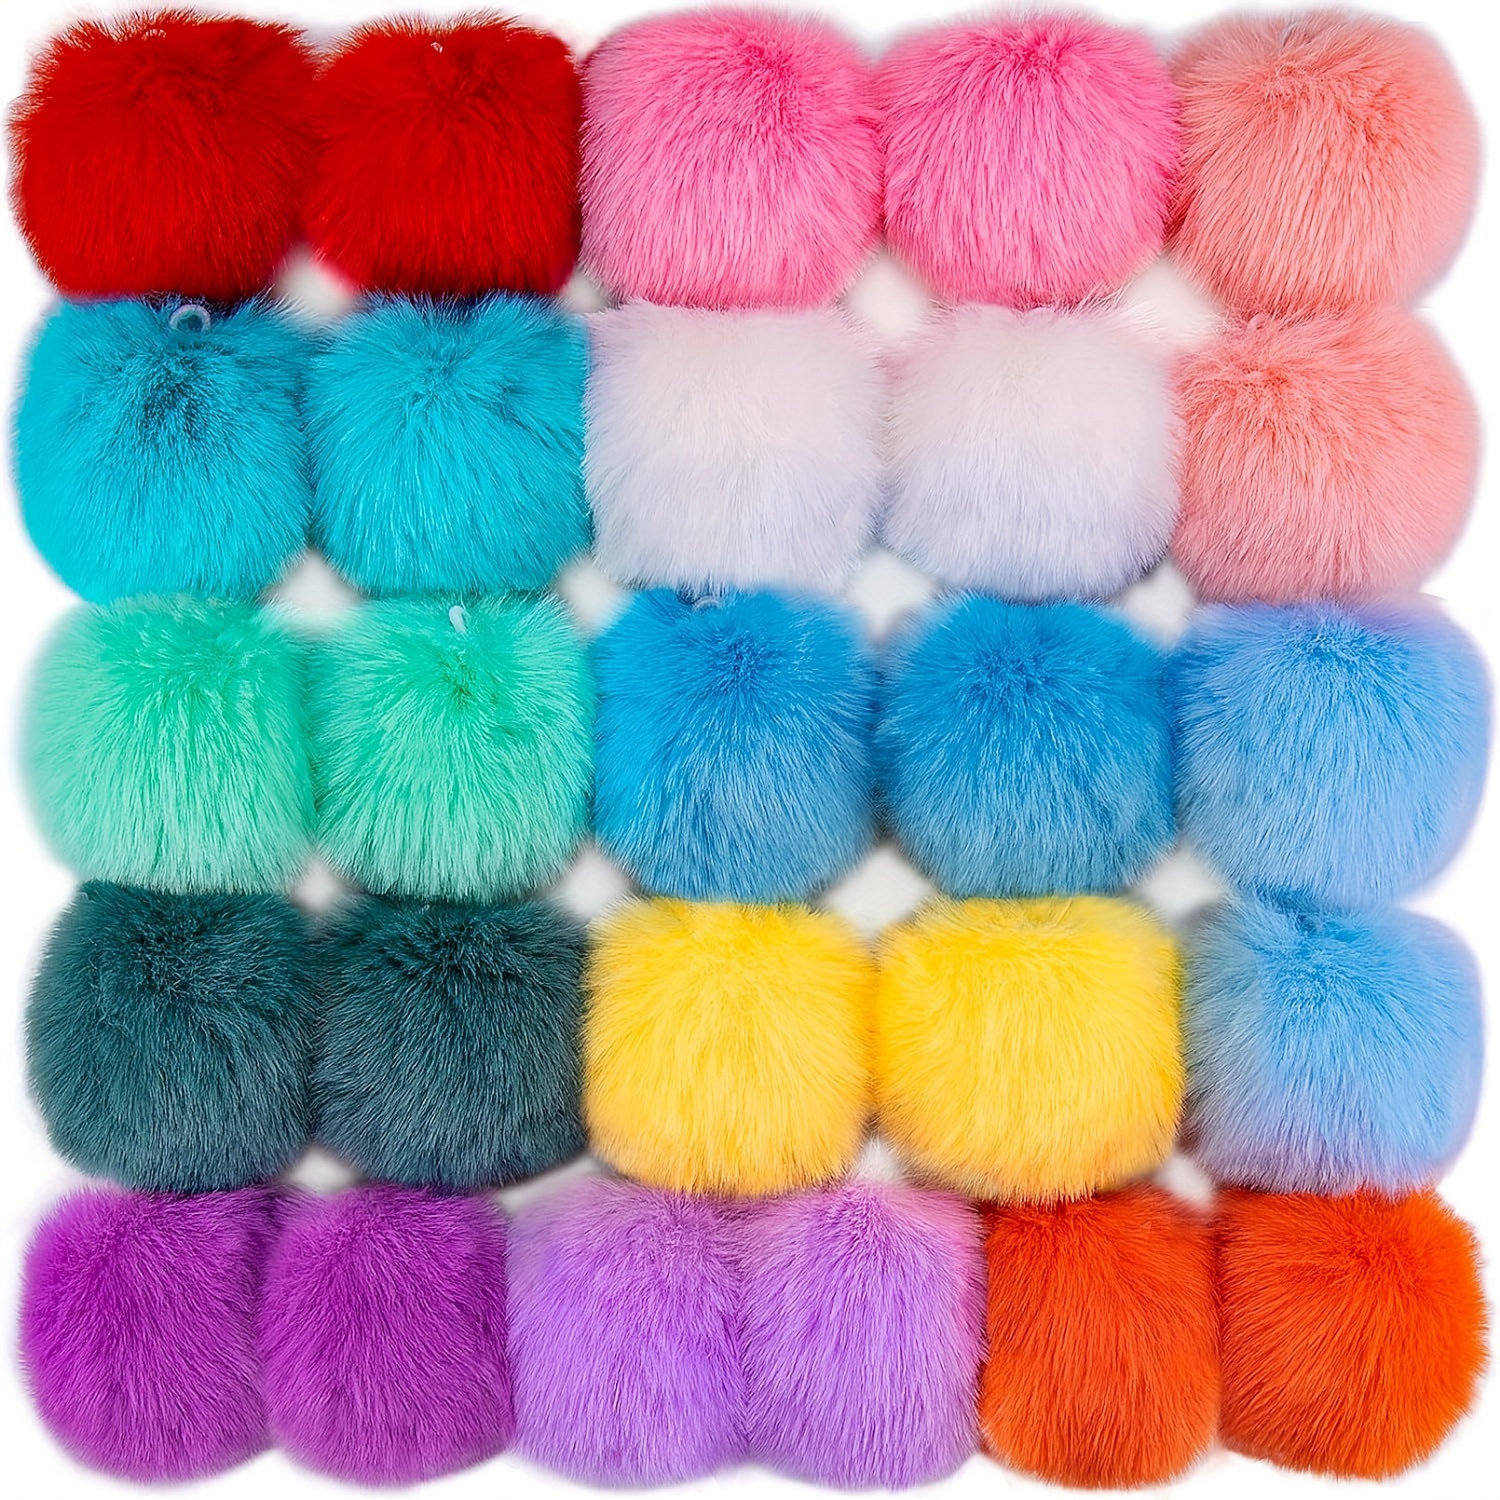 

soft-touch" 26-piece Faux Rabbit Fur Pom Poms Set With Elastic Bands - Diy Fluffy Craft Accessories For Hats, Shoes, Scarves, Gloves & Bags - 13 Vibrant Colors (2 Each)